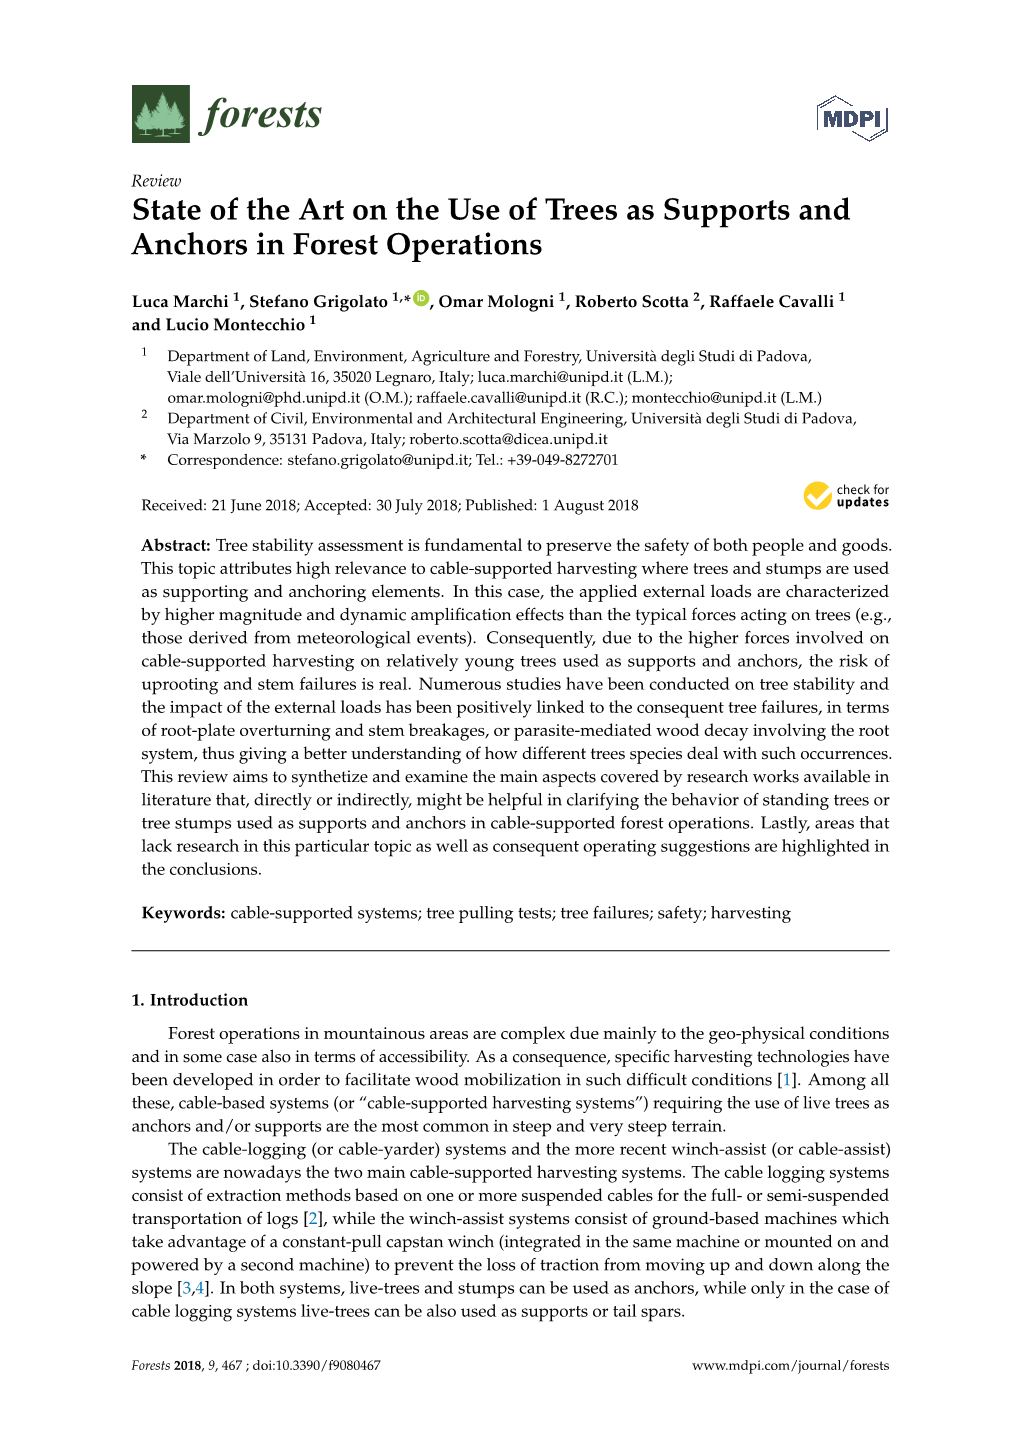 State of the Art on the Use of Trees As Supports and Anchors in Forest Operations